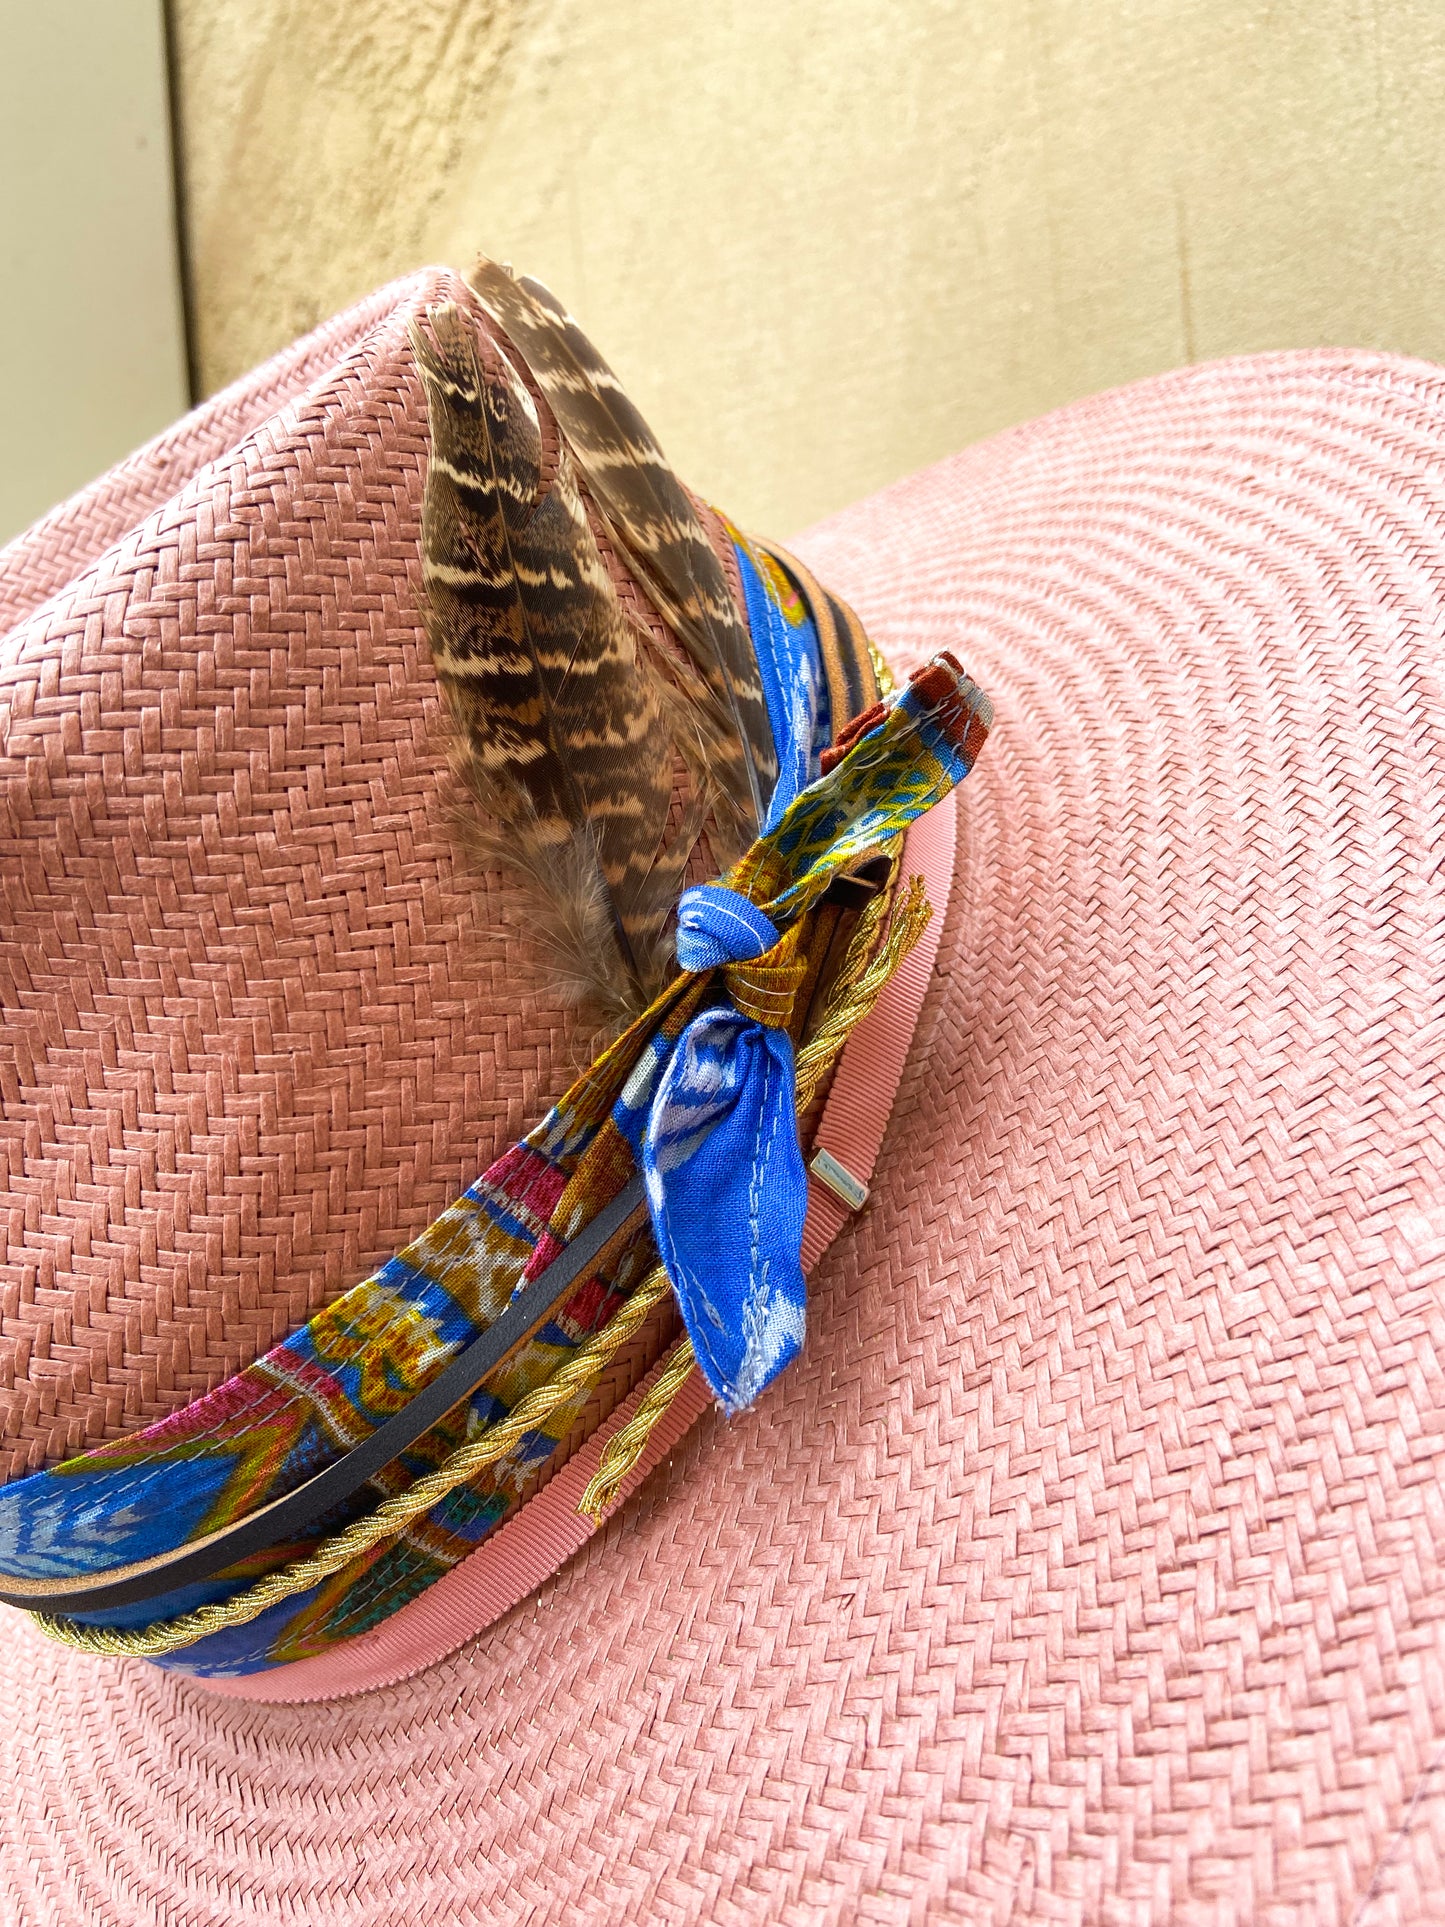 LS Upcycled Handmade Hatbands & Feathers Straw Hat